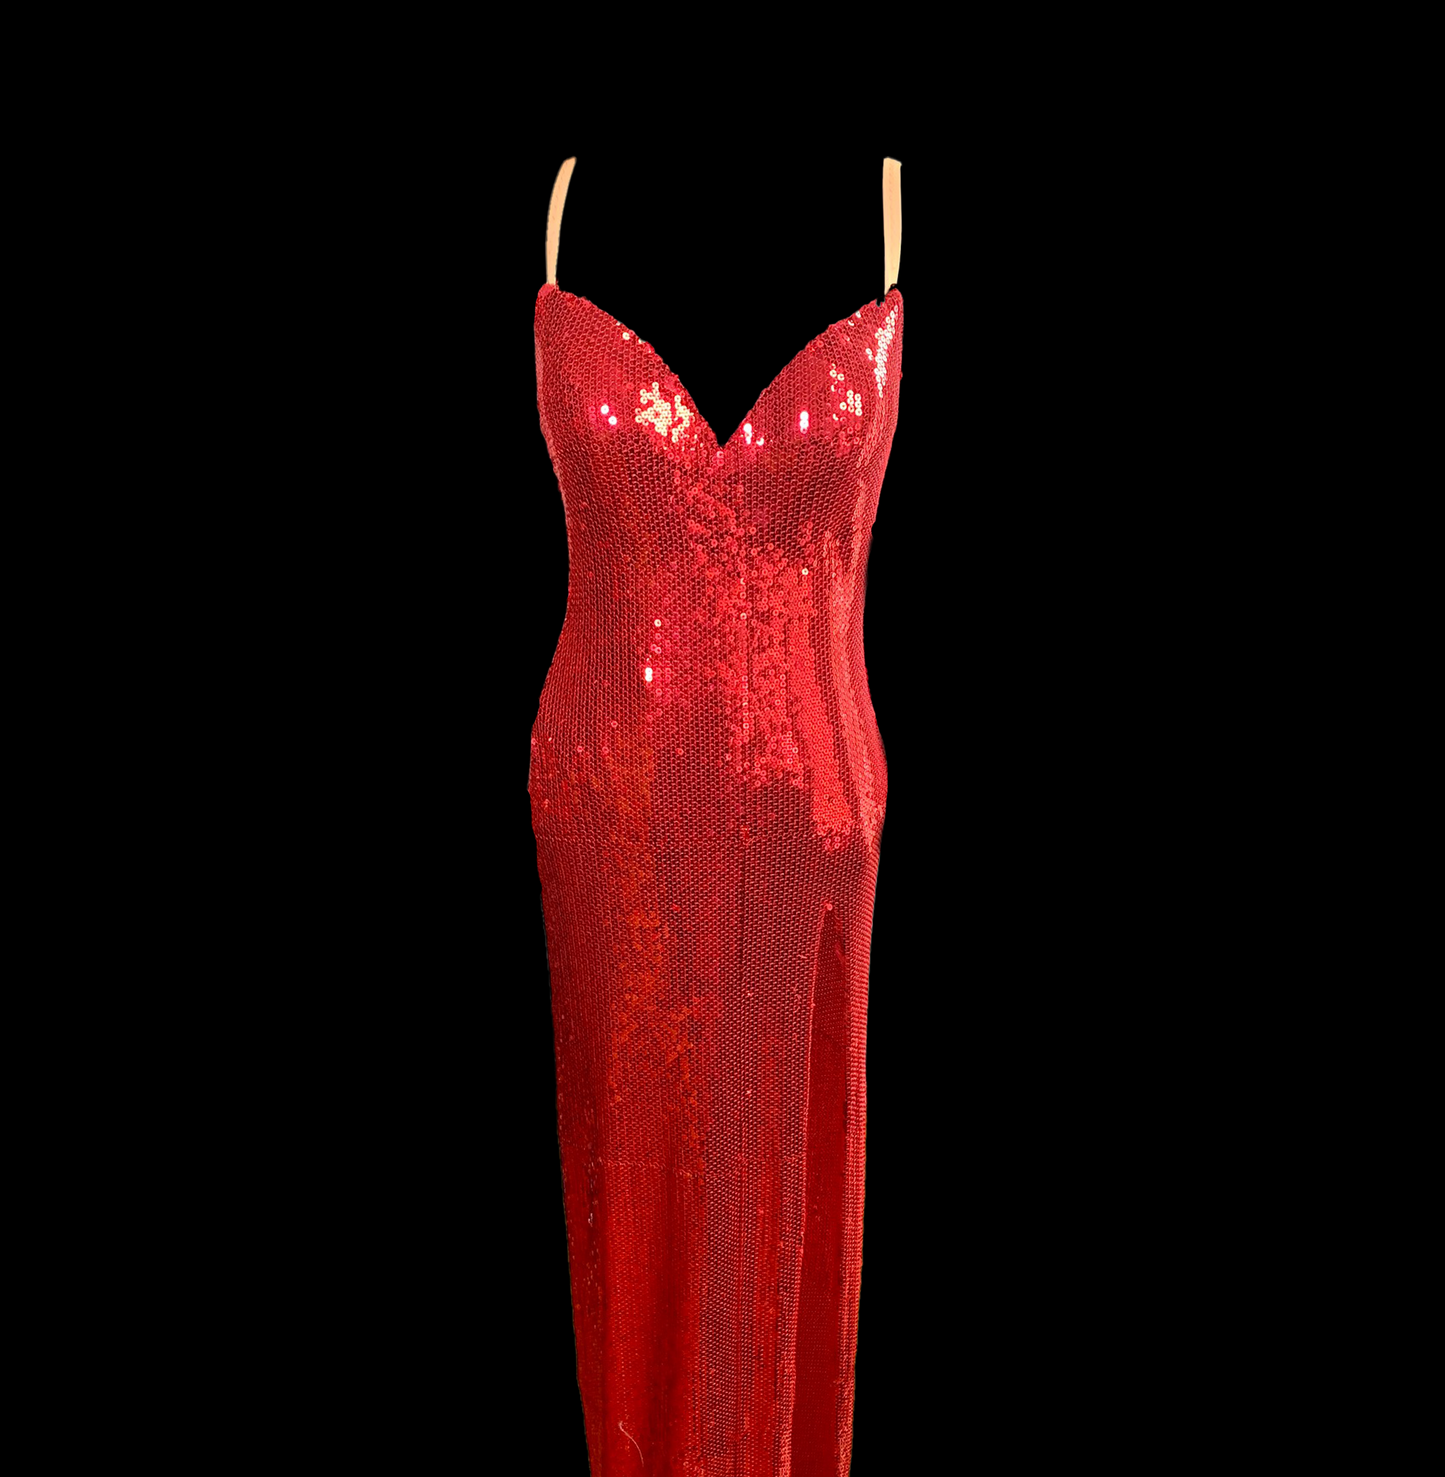 Resale Artistry in Motion Sleeveless Red Sequin Latin Dress with Sweetheart Neckline, Deep Side Slit in Skirt, and Bare Back Sz S Lat144